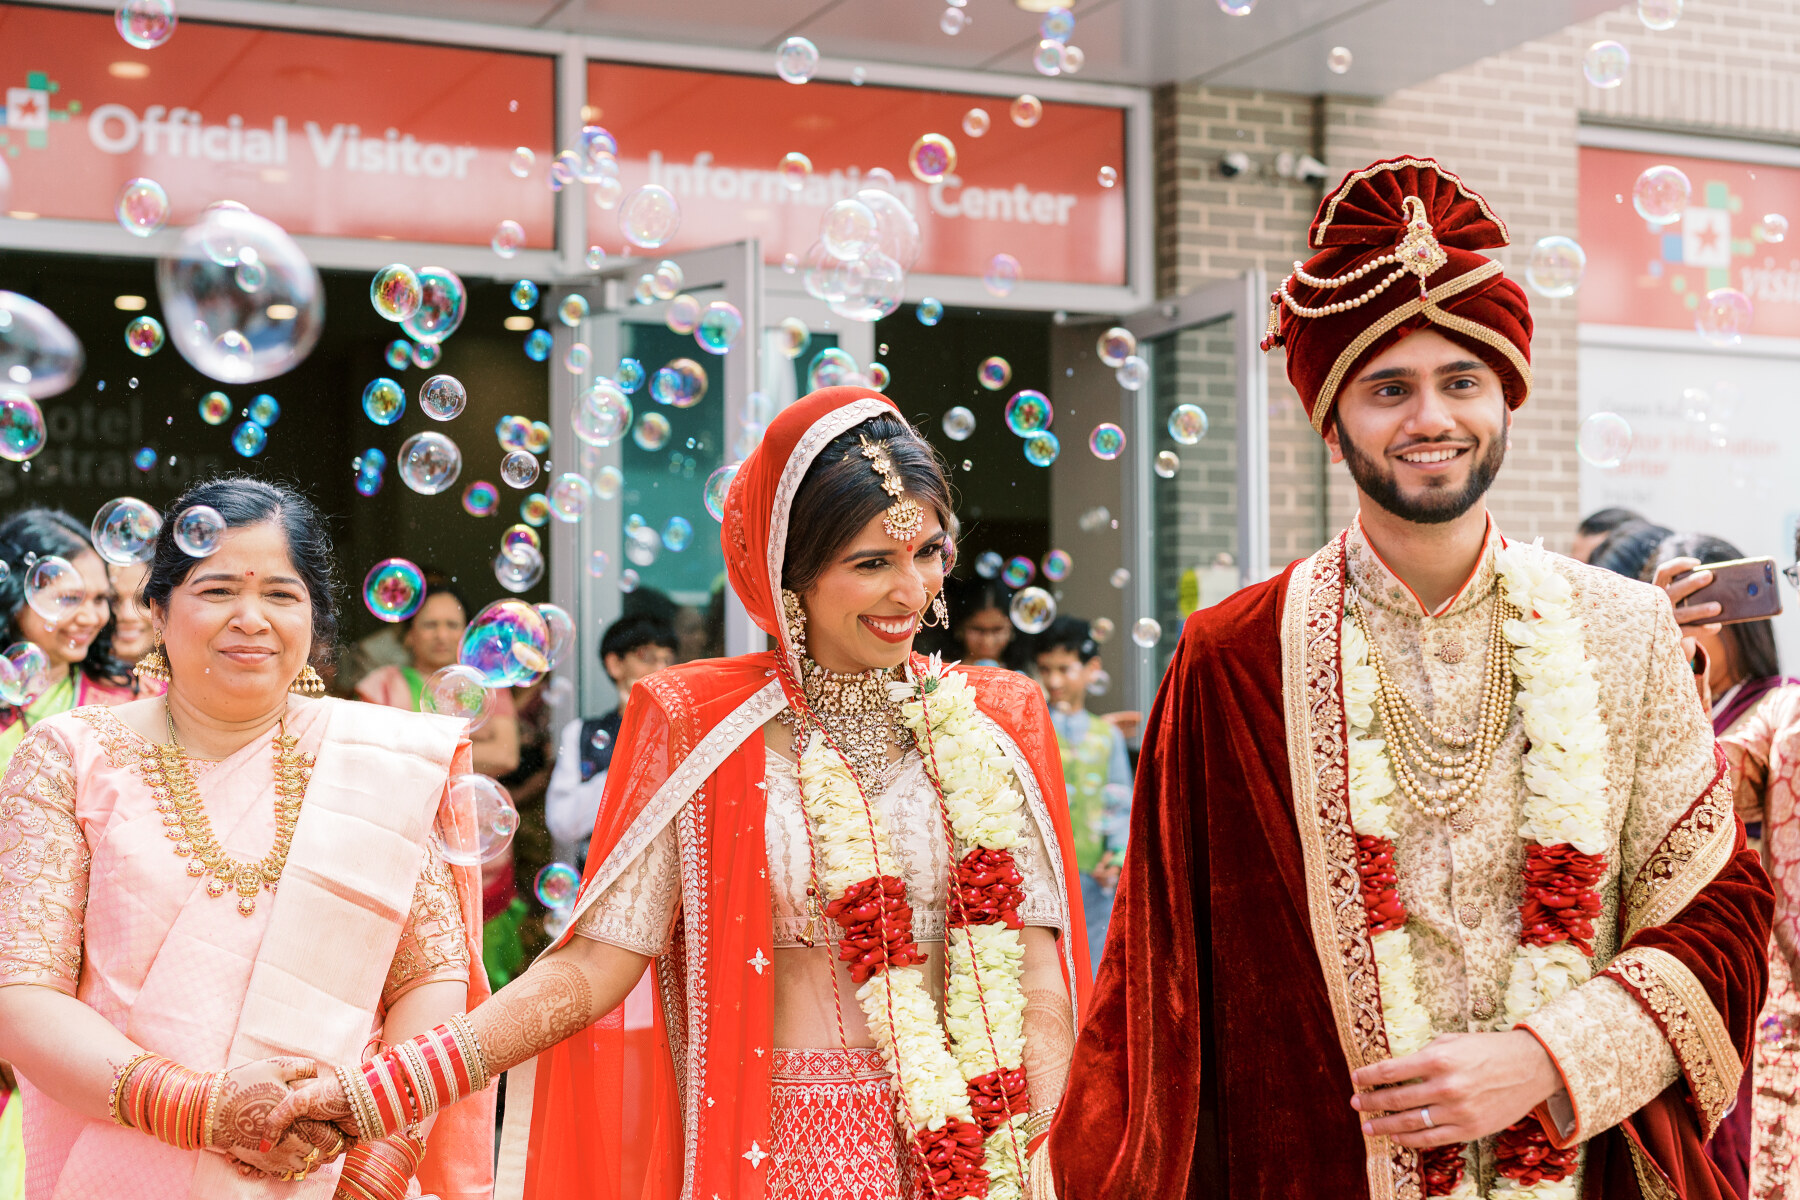 Ananya + Harsh during the Vidaai ceremony captured by Jamie Vinson Photography